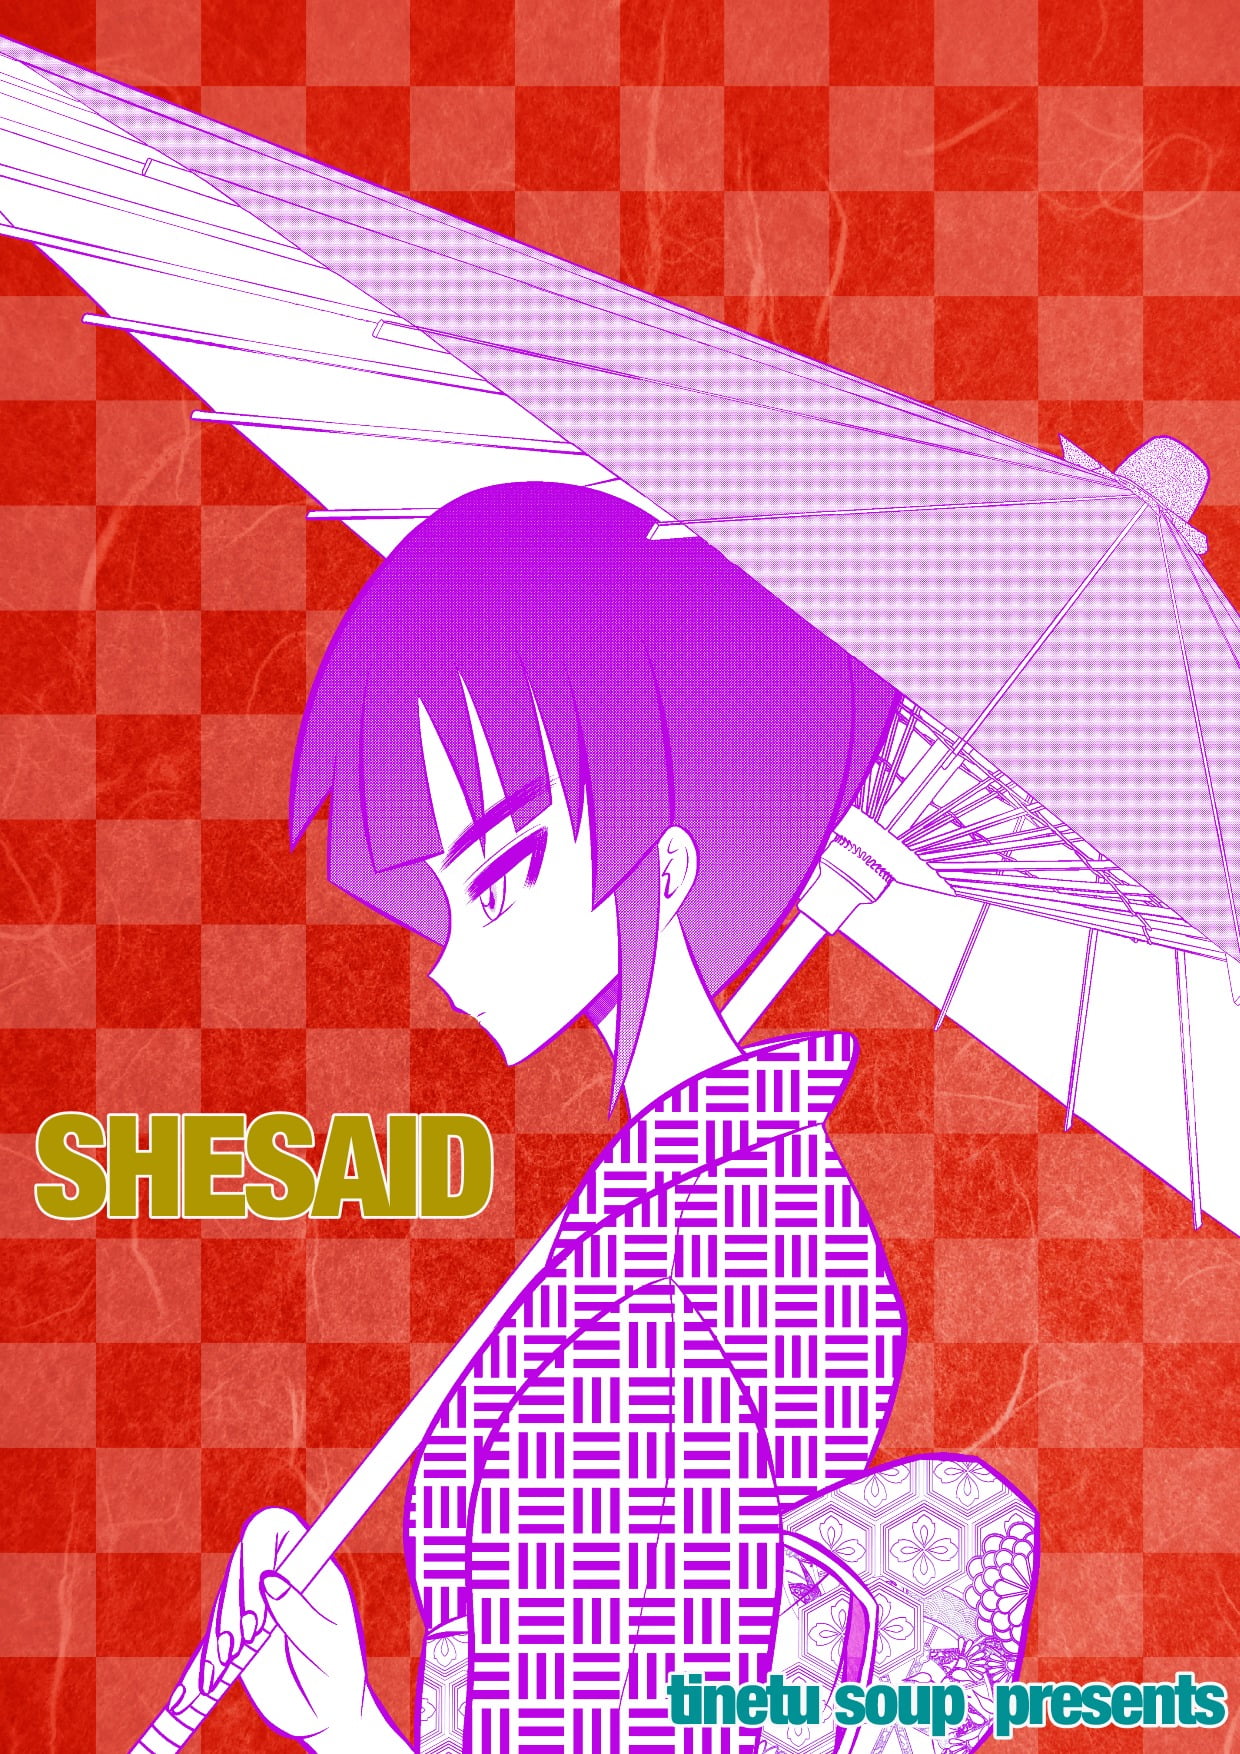 SHESAIDのイラスト 